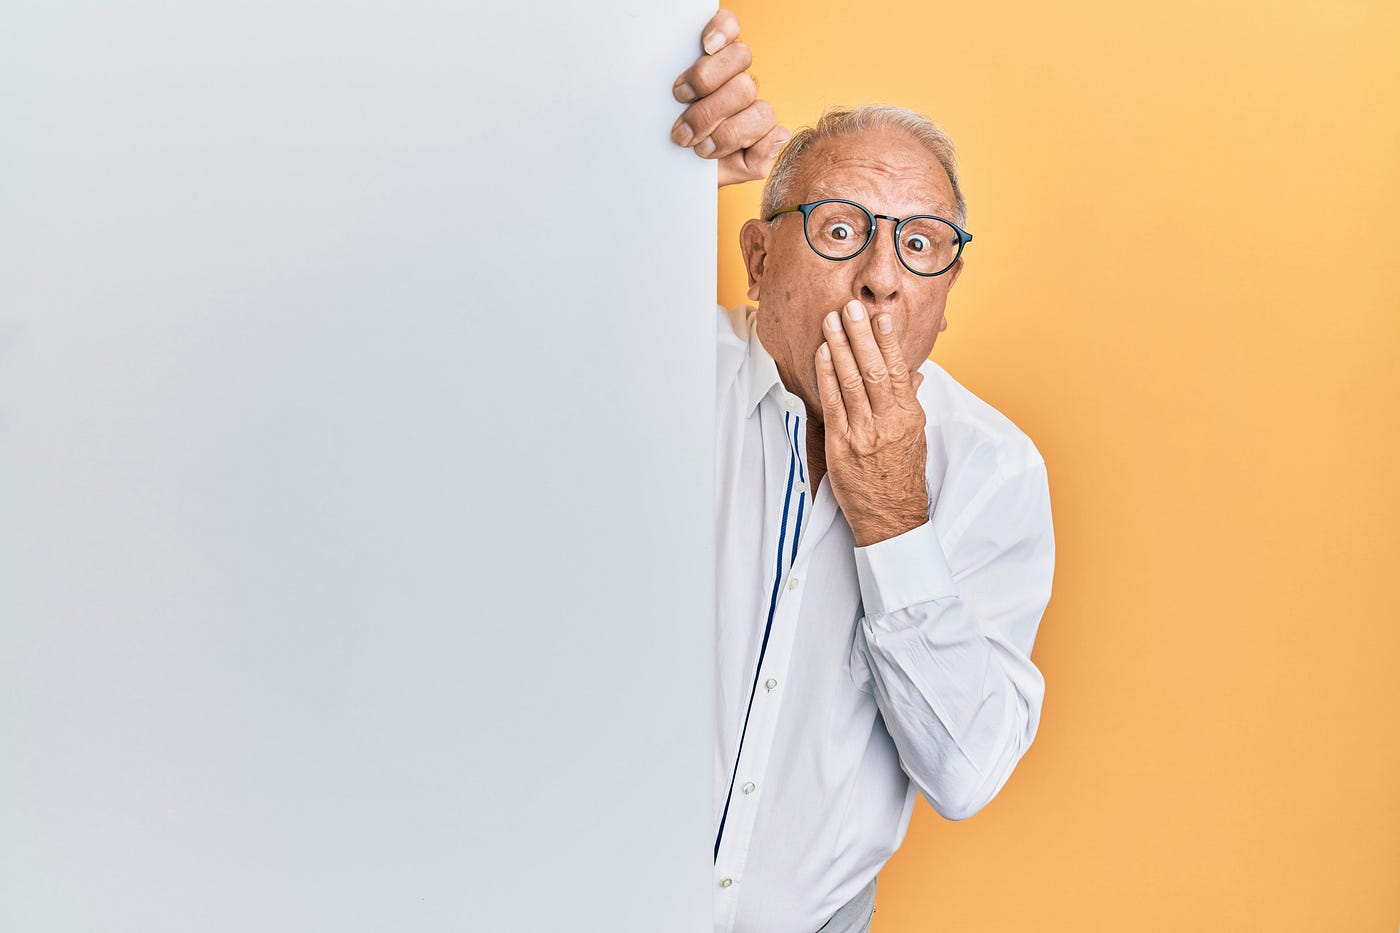 An older man in a white shirt expresses surprise by placing his left hand over his mouth.